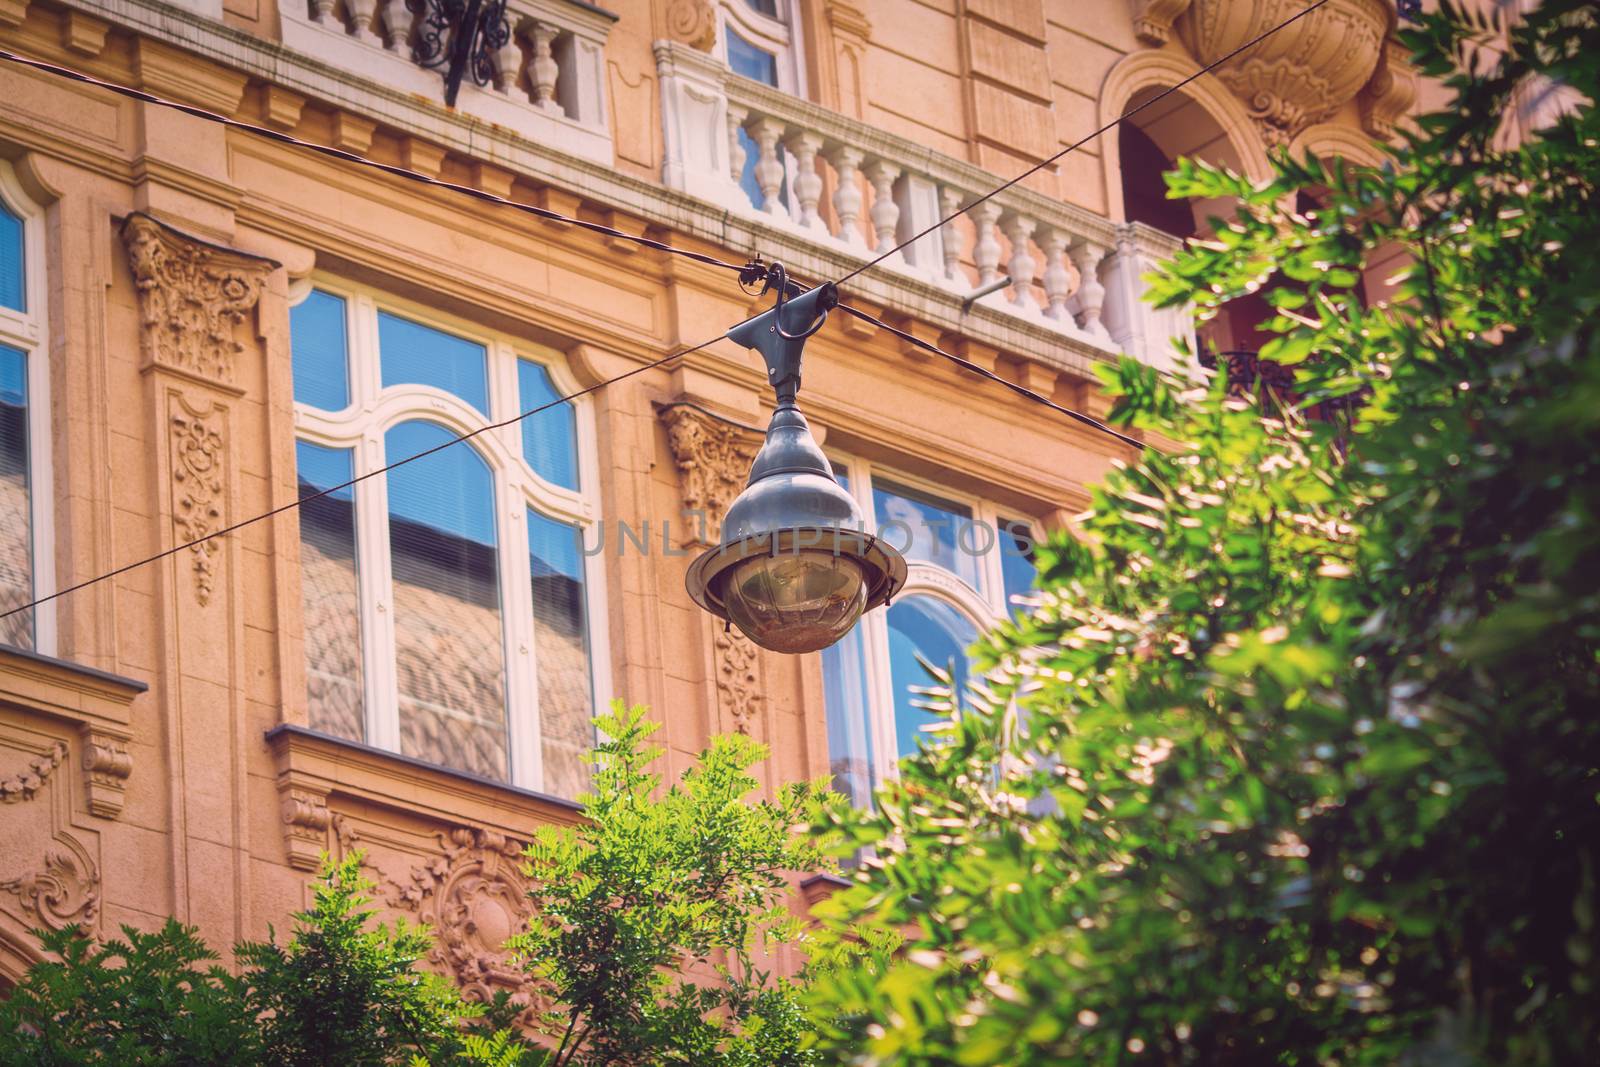 Close-up of a street lamp on aerial wires above green trees and a beautiful old building in the background. Hanging street light in Budapest city center.